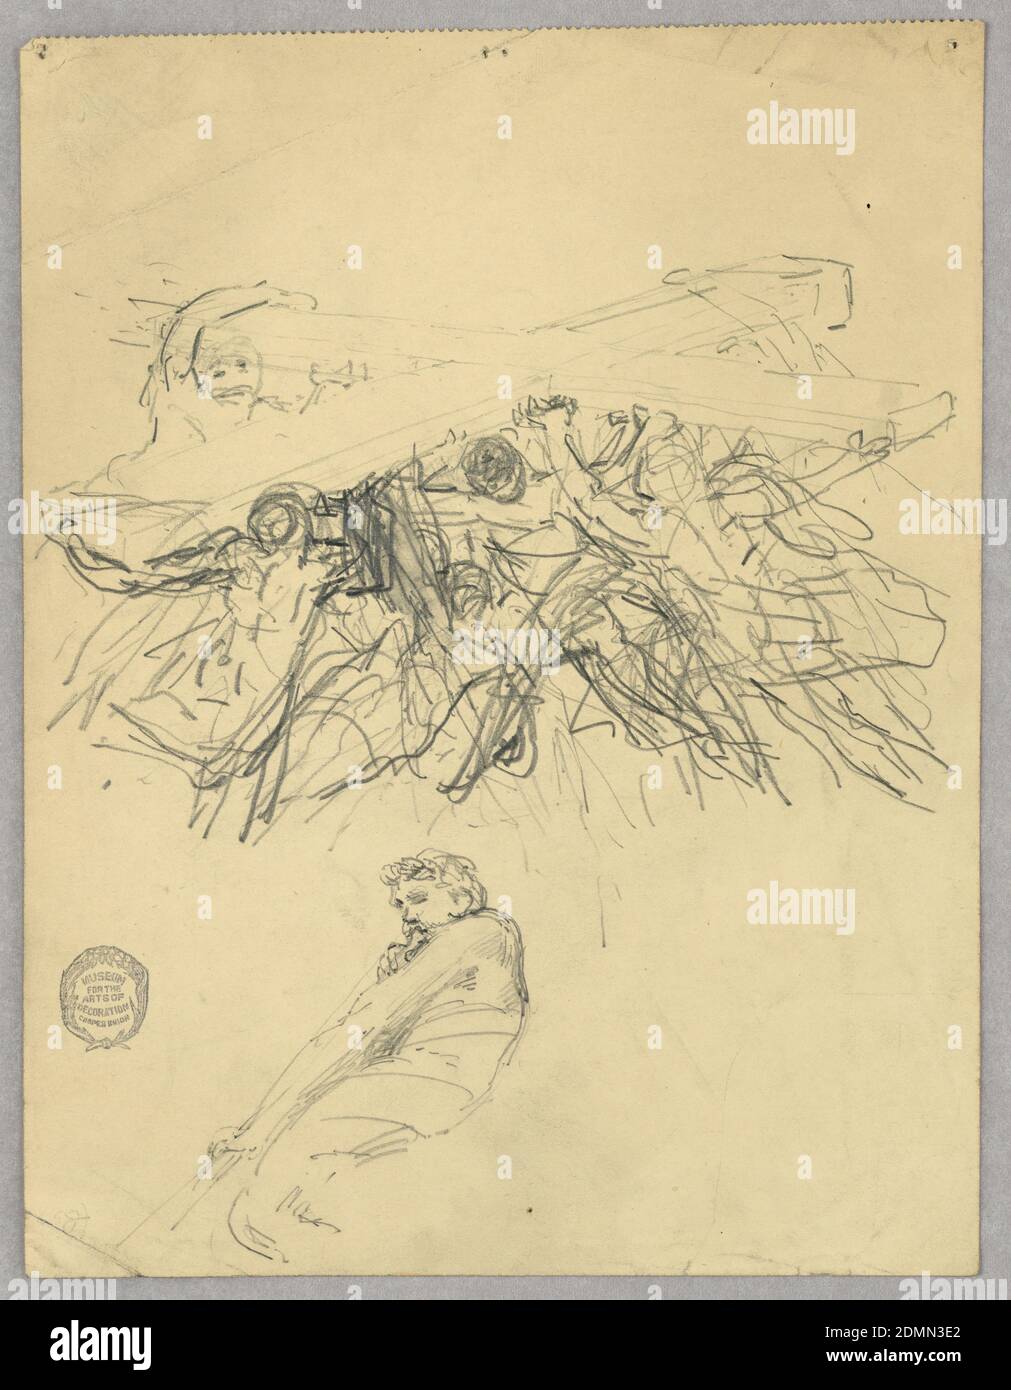 Sketch of Figures Bearing a Cross, Francis Augustus Lathrop, American, 1849 - 1909, Graphite on paper, Sketch of figures bearing a cross. Below, man with laurel crown, blowing a horn; mouth of horn not pictured. Probably a study for a mural of the Ascension., USA, ca. 1895, figures, Drawing Stock Photo